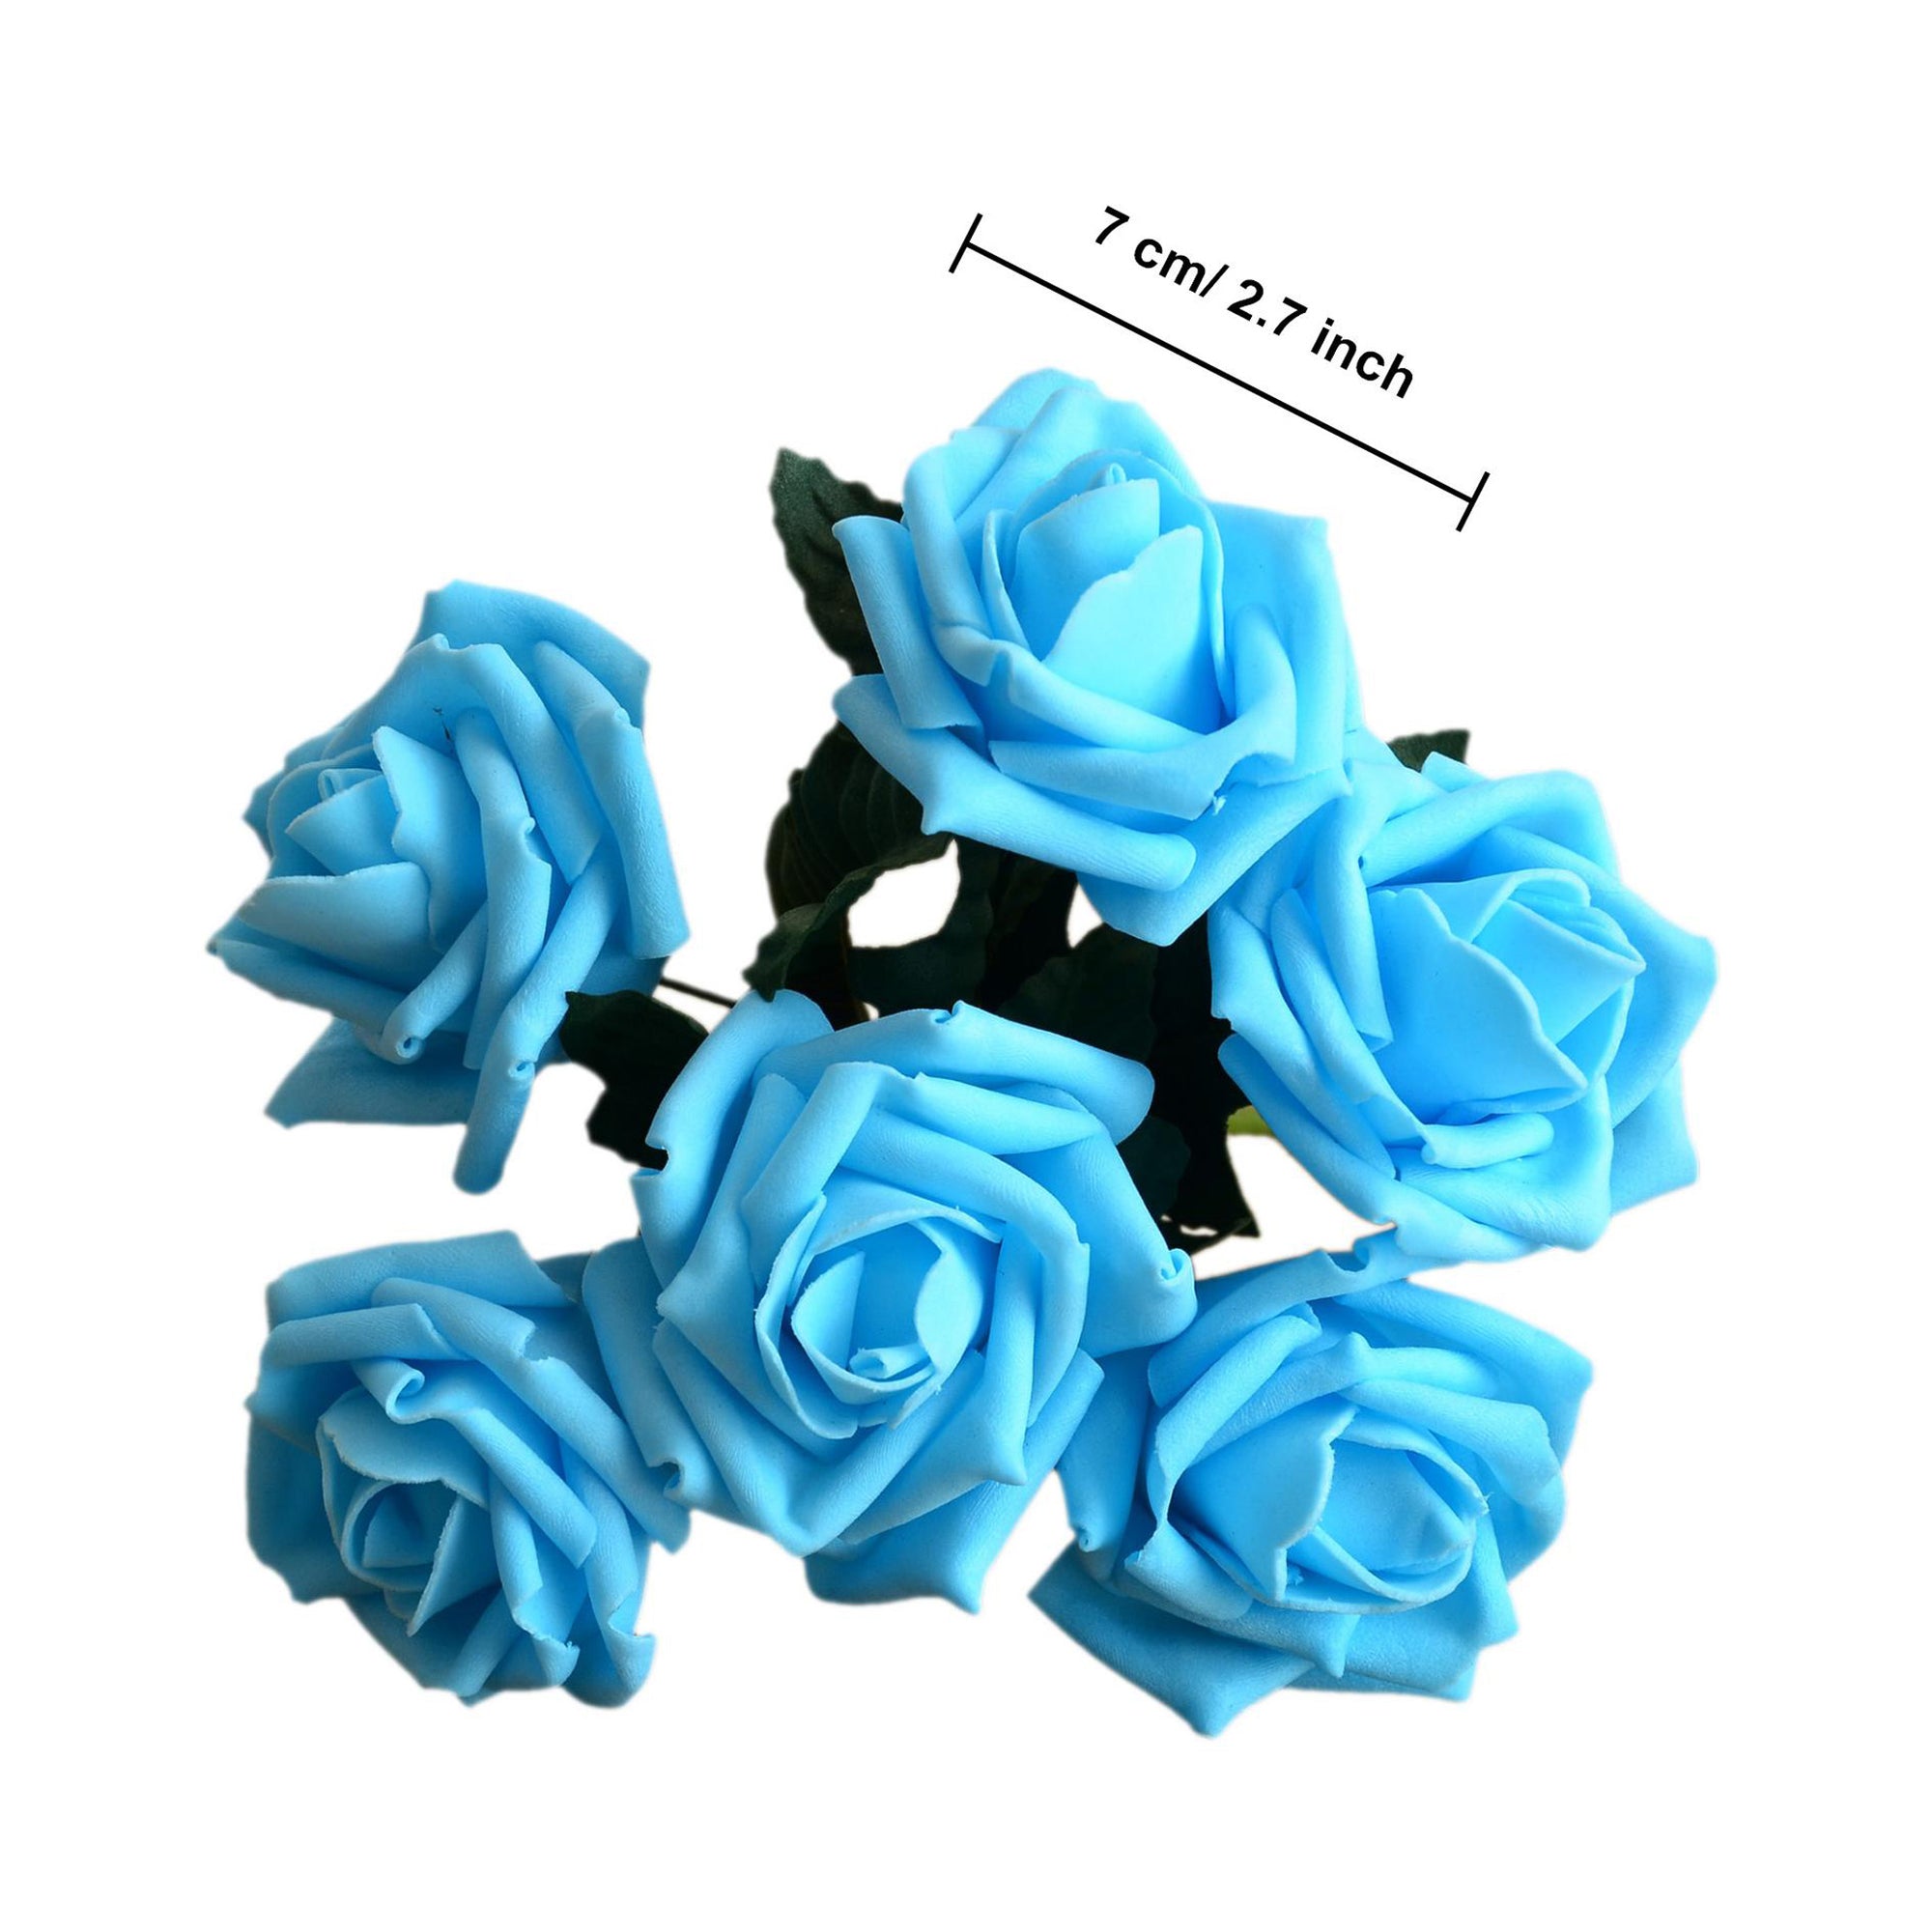 Turquoise Blue Roses Wedding Flowers Artificial Flowers